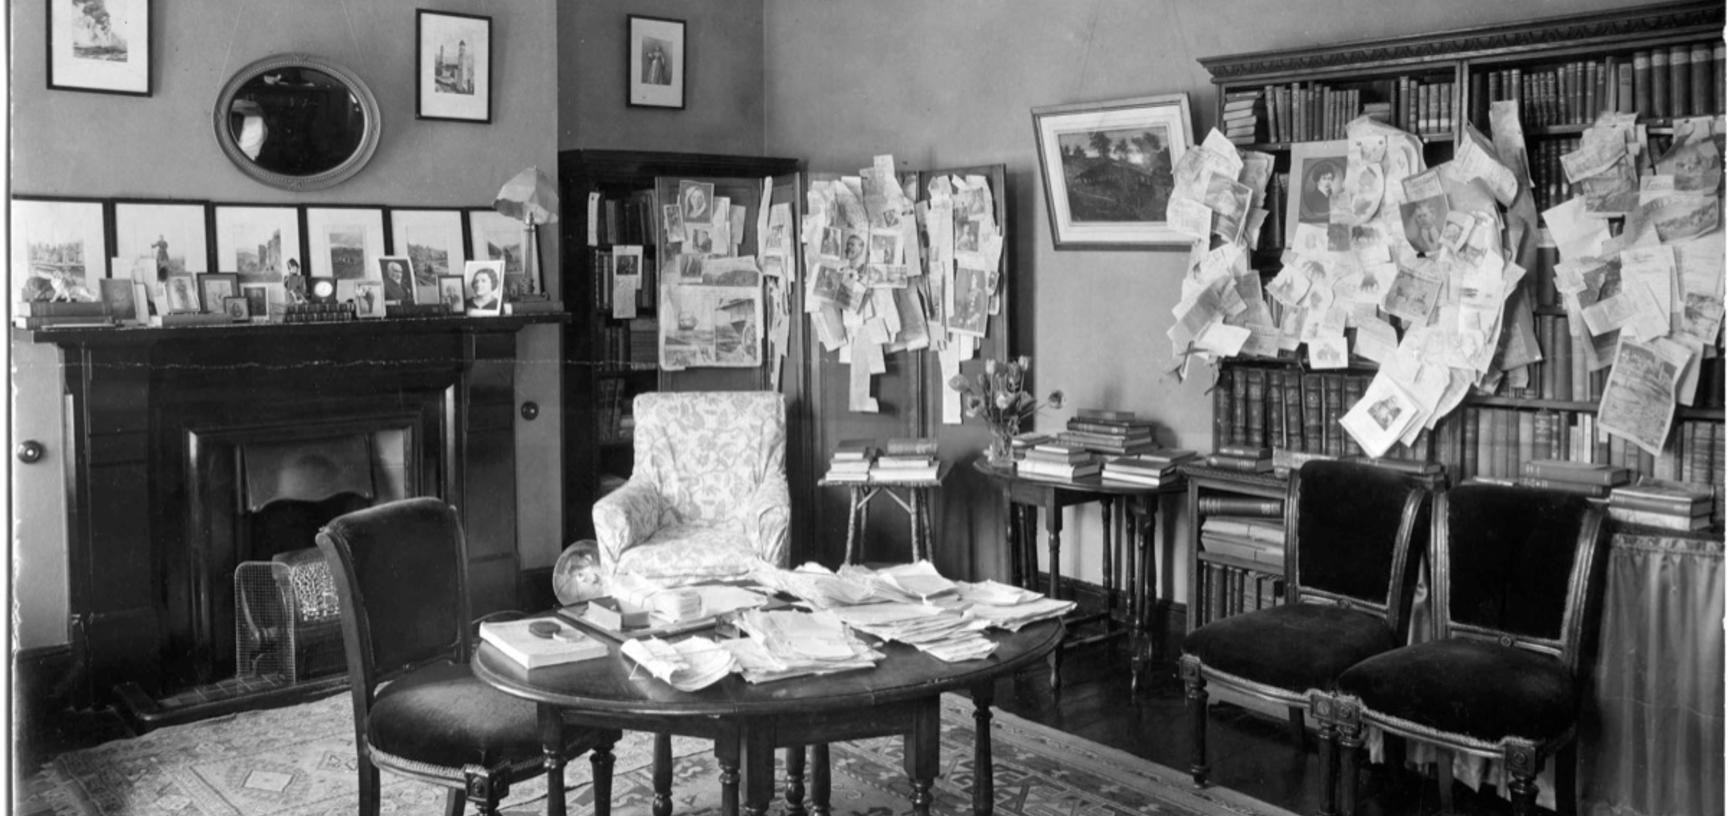 John Baddeley’s study at 10 Keble Road, Oxford.  Photographer unknown. Oxford, England. Late 1930s.